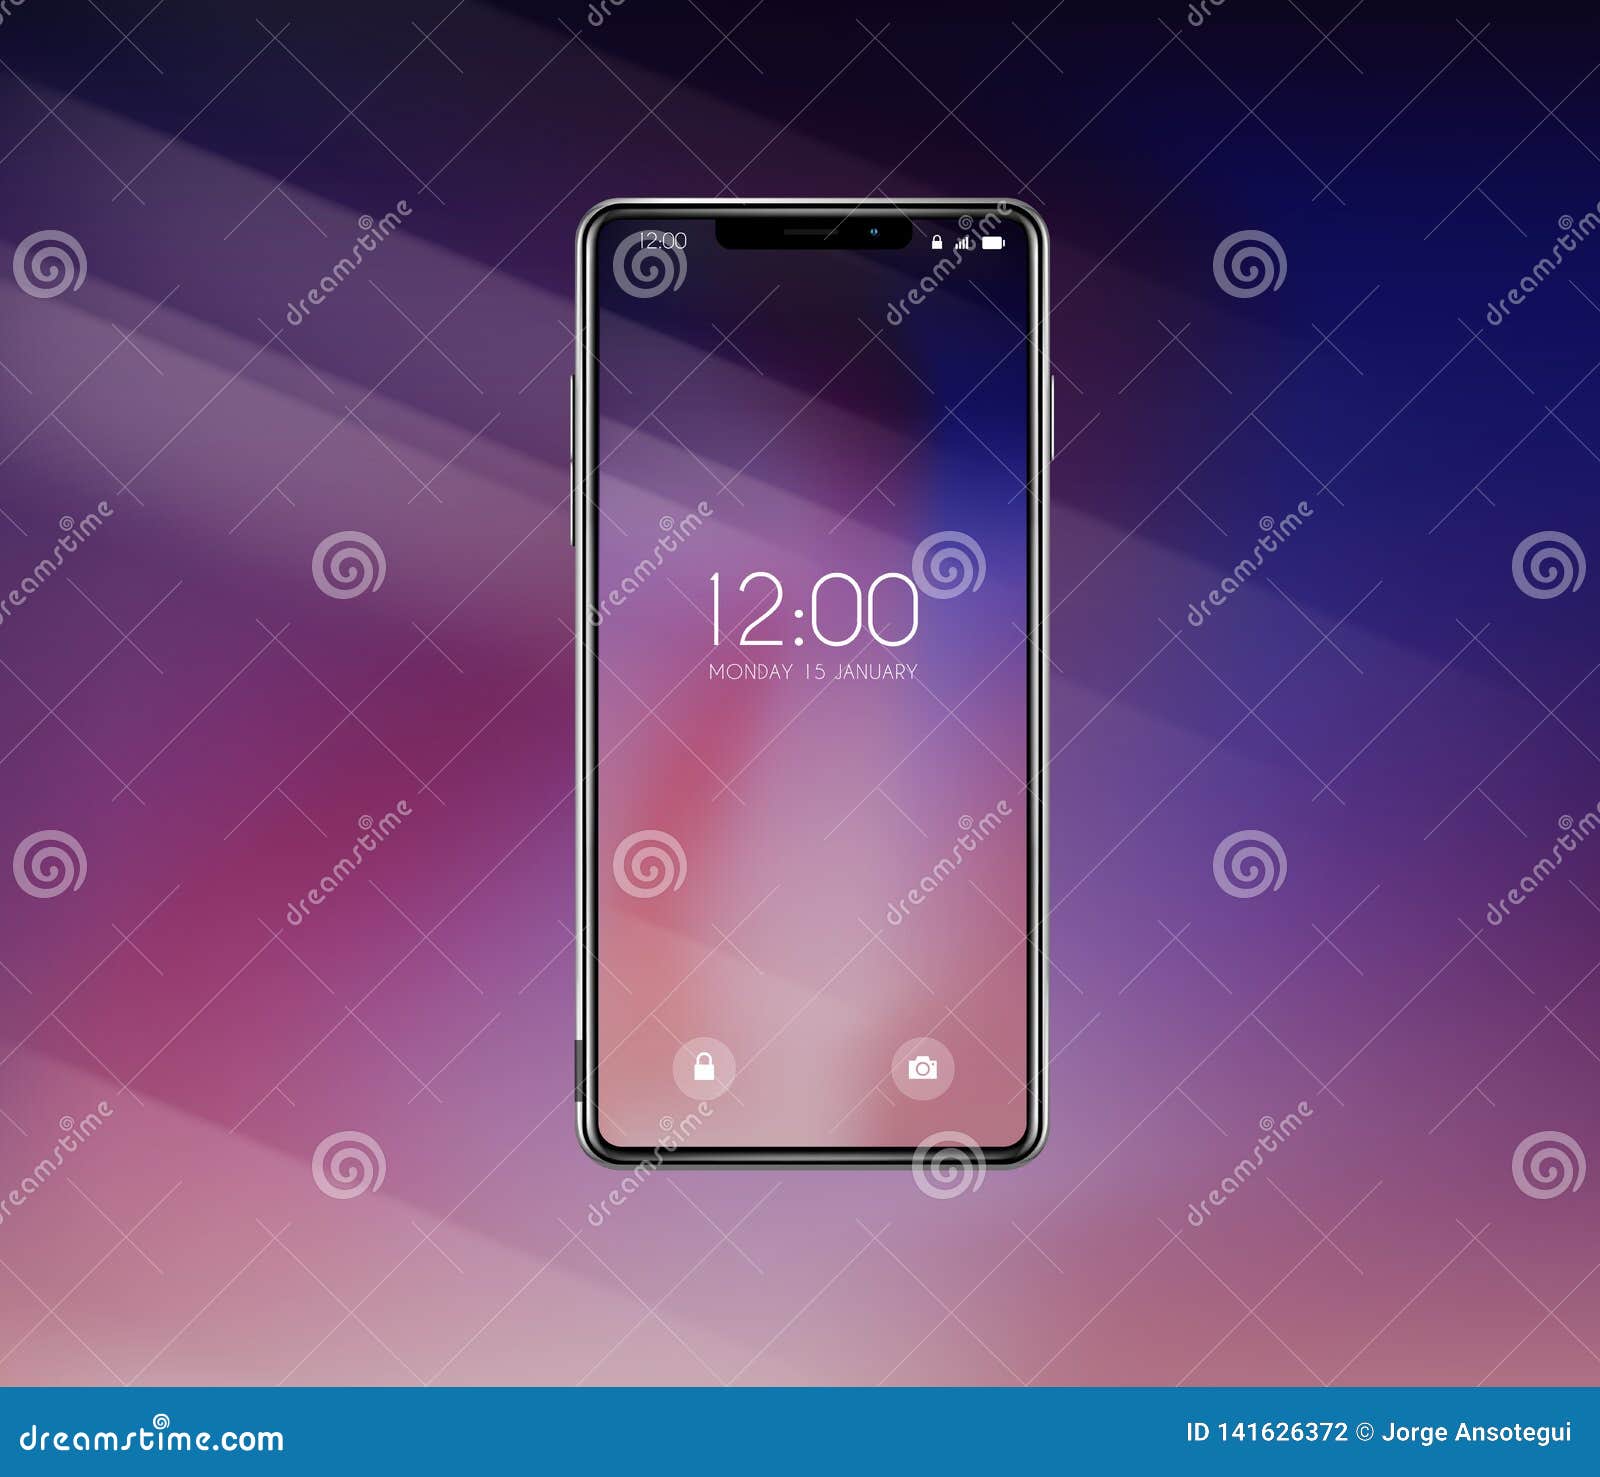 new front smartphone, phone prototype with advertisment background. mobile with background and hour screen. mockup model for add,